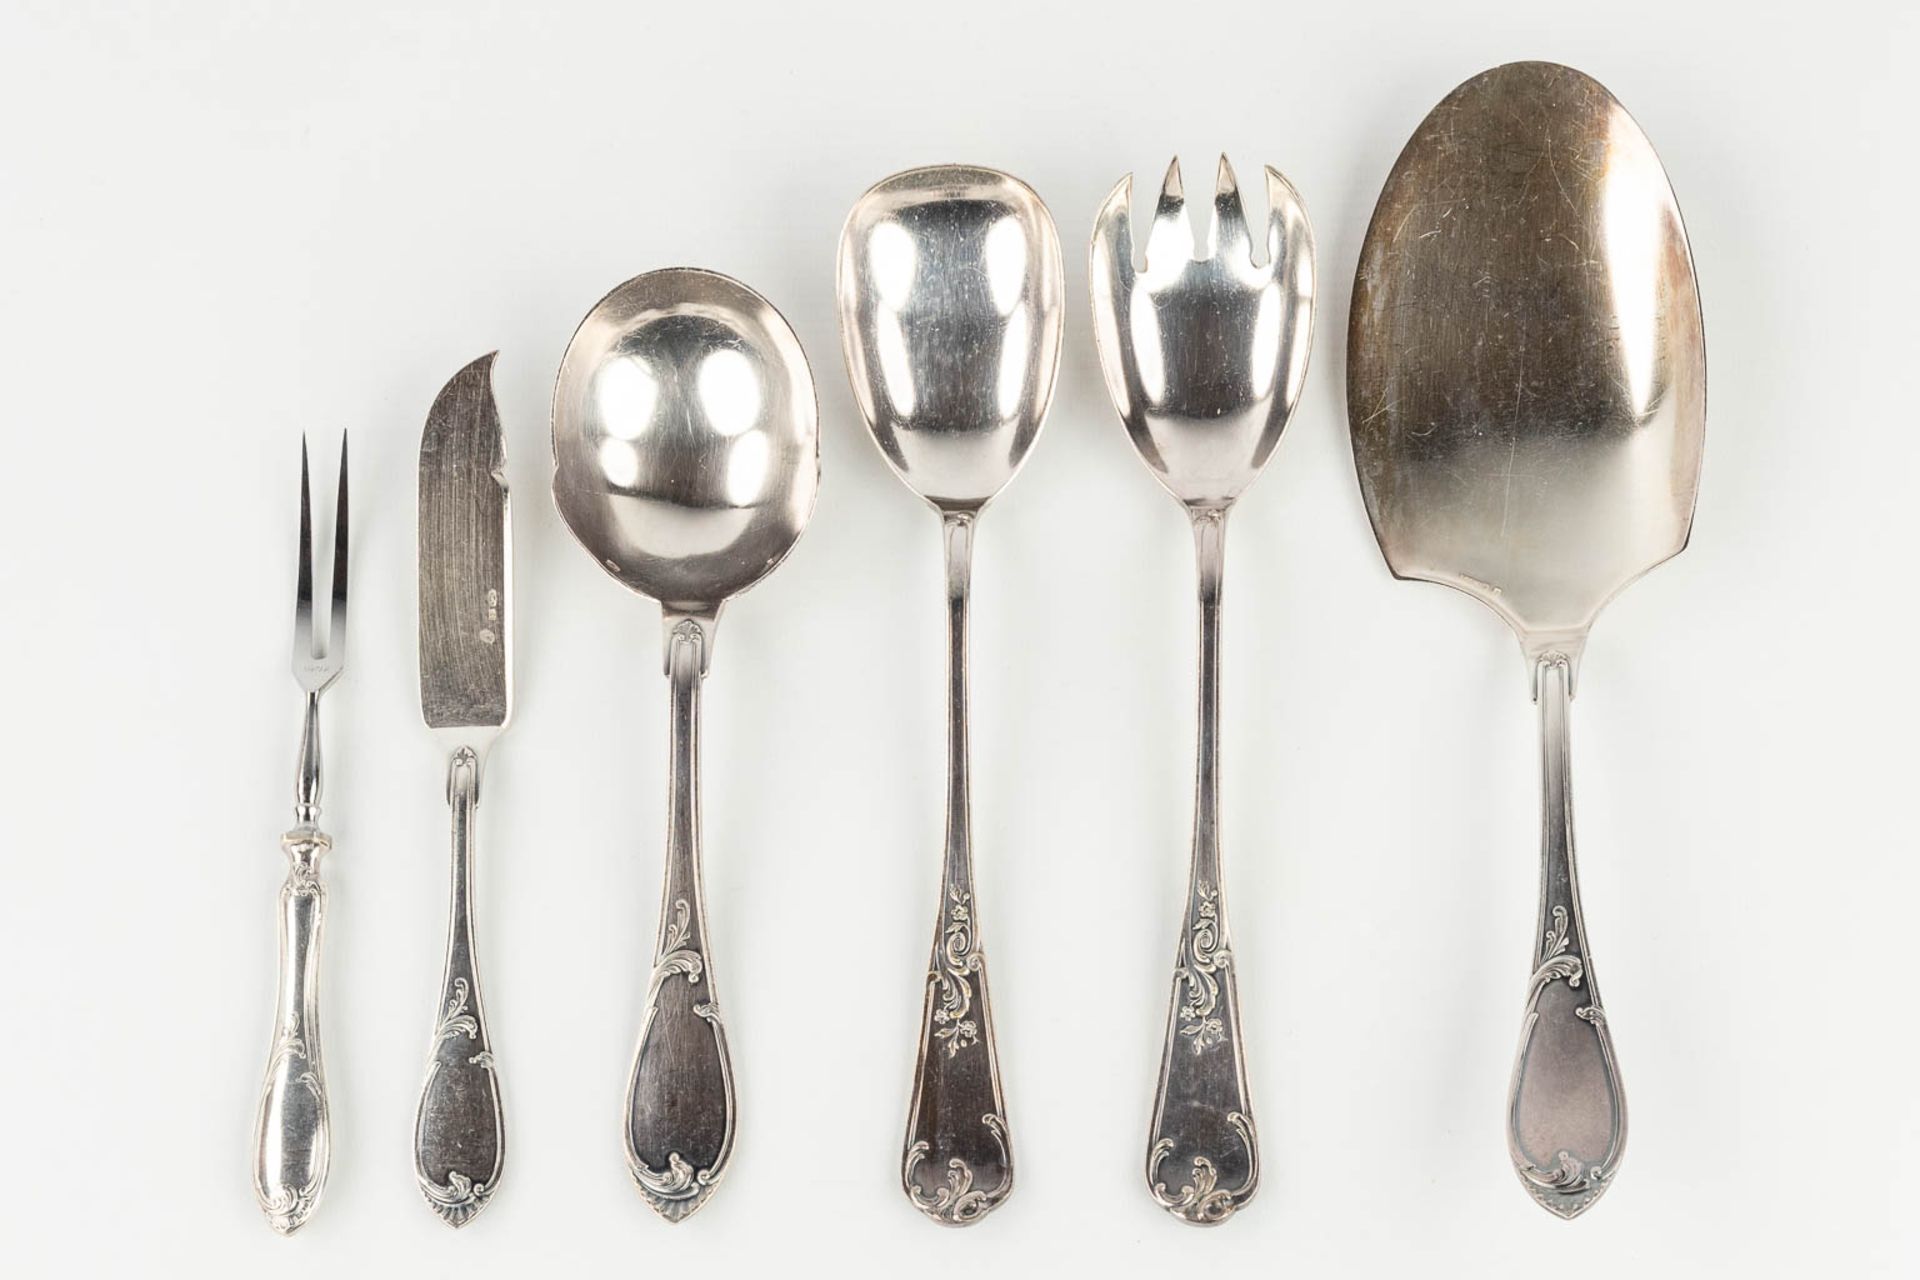 B. Wiskemann, Bruxelles, a silver-plated cutlery set, Louis XV style. (L: 30 x W: 39 x H: 22 cm) - Image 13 of 24